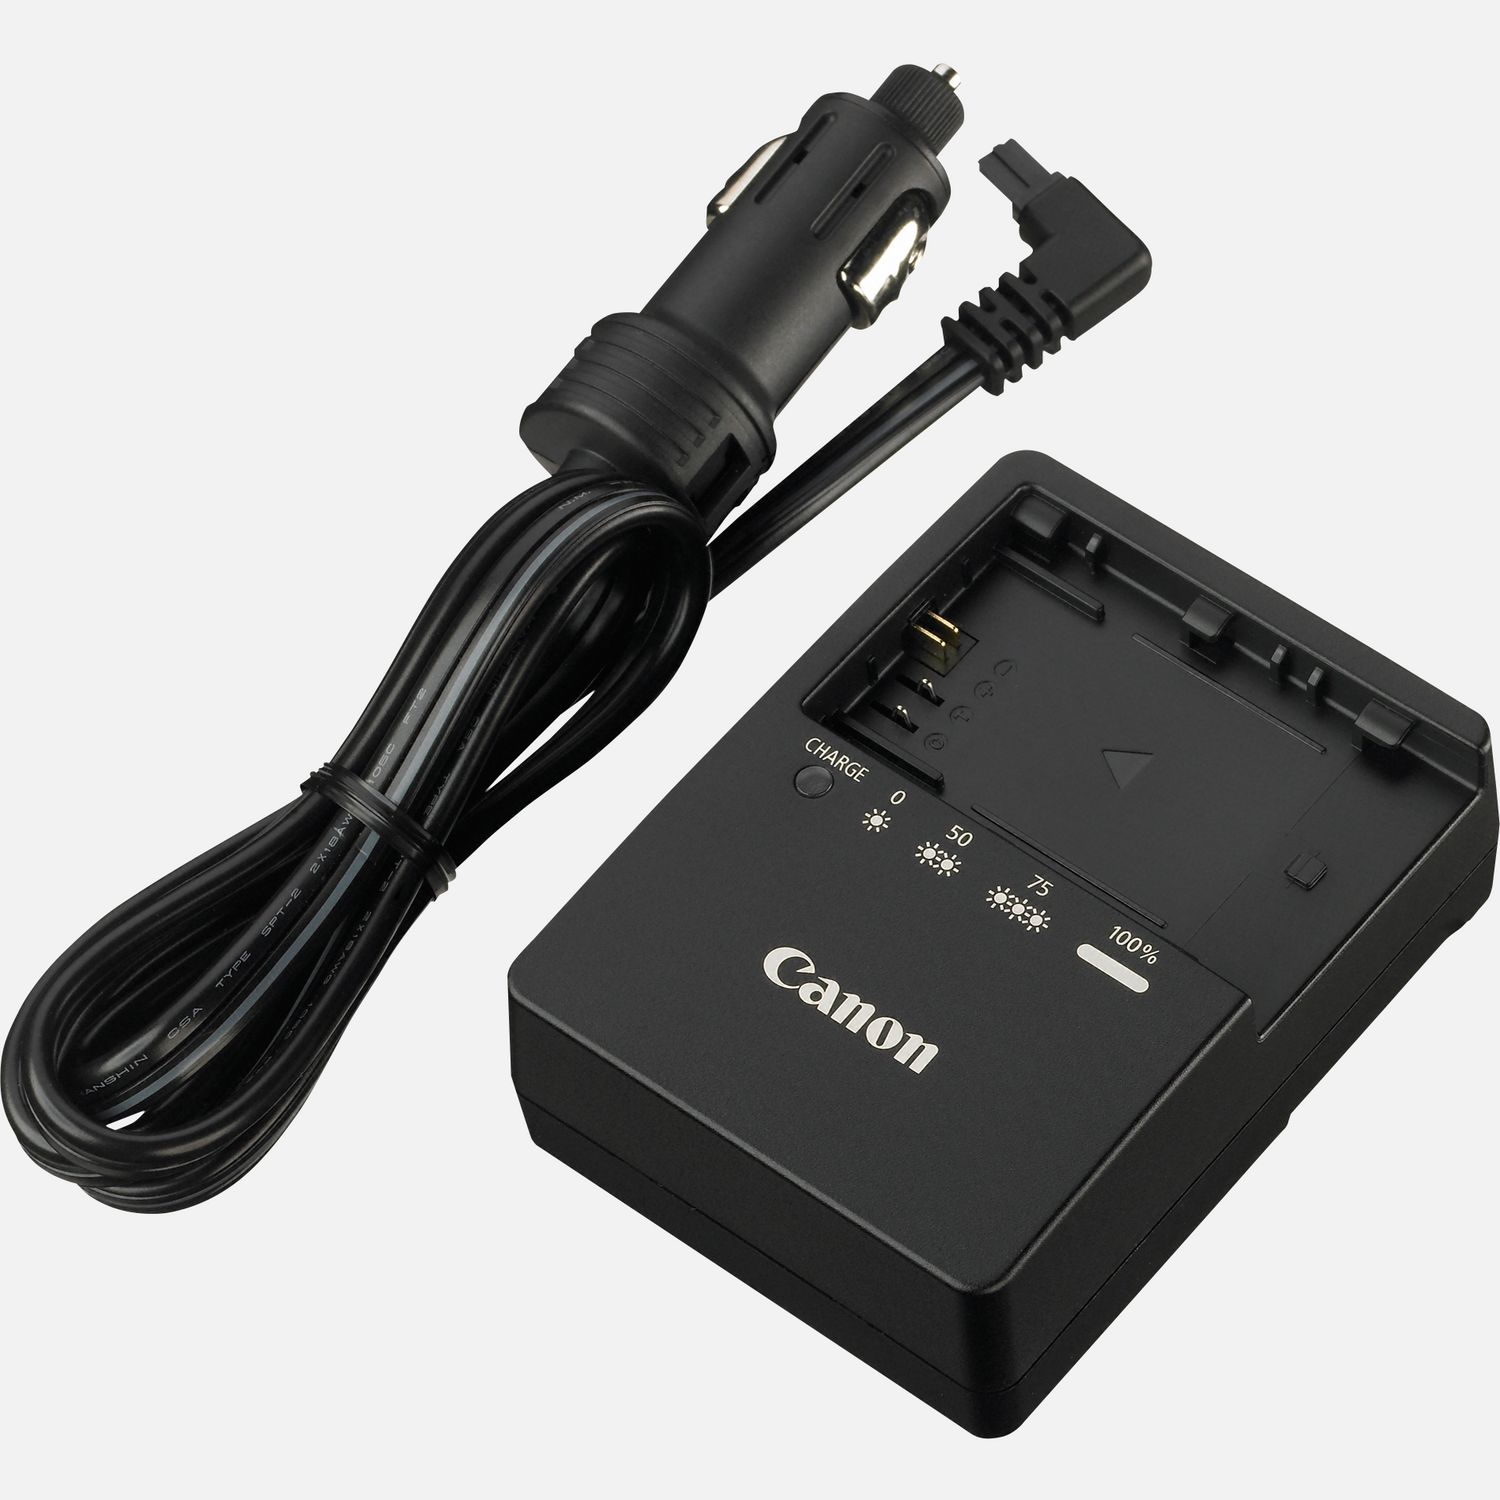 Buy Canon  CBC E6 Car Battery Charger   Canon  UK Store